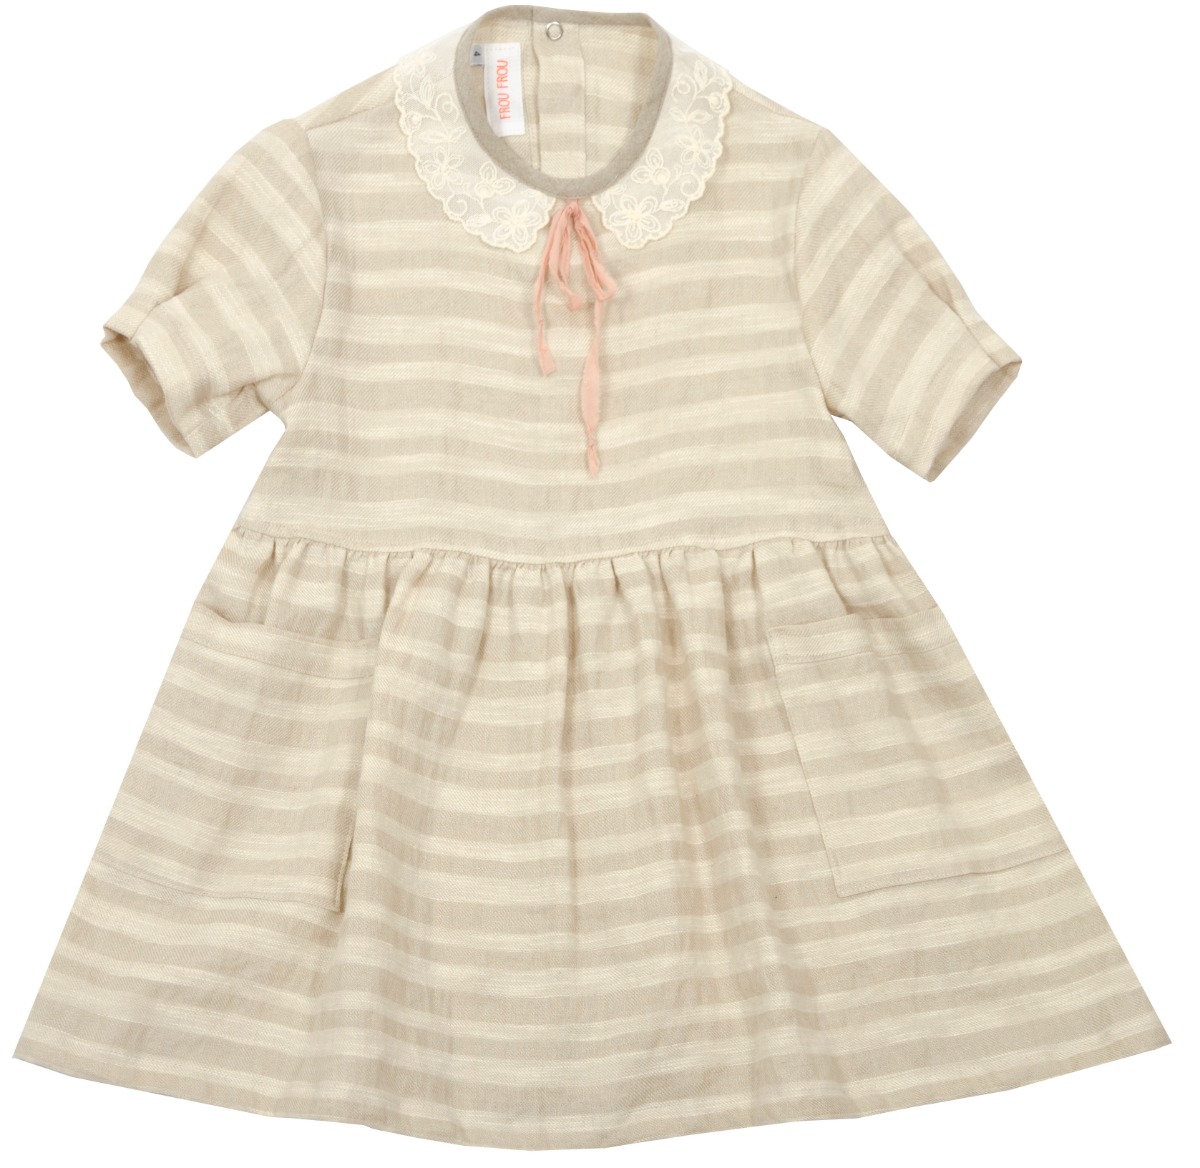 DAY DRESS striped with lace collar